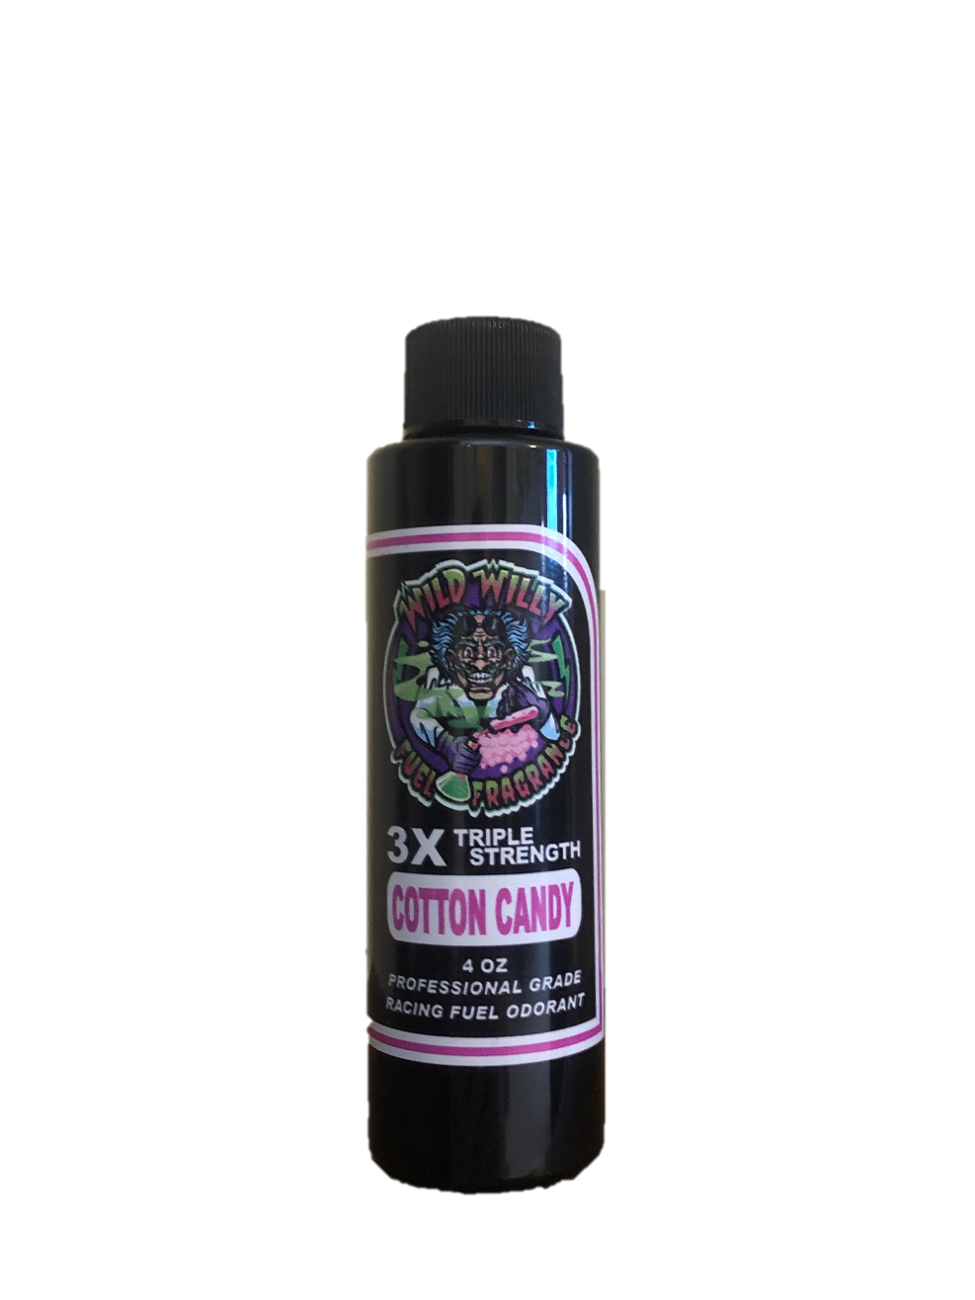 Cotton Candy - Wild Willy Fuel Fragrance - 3X Triple Strength!